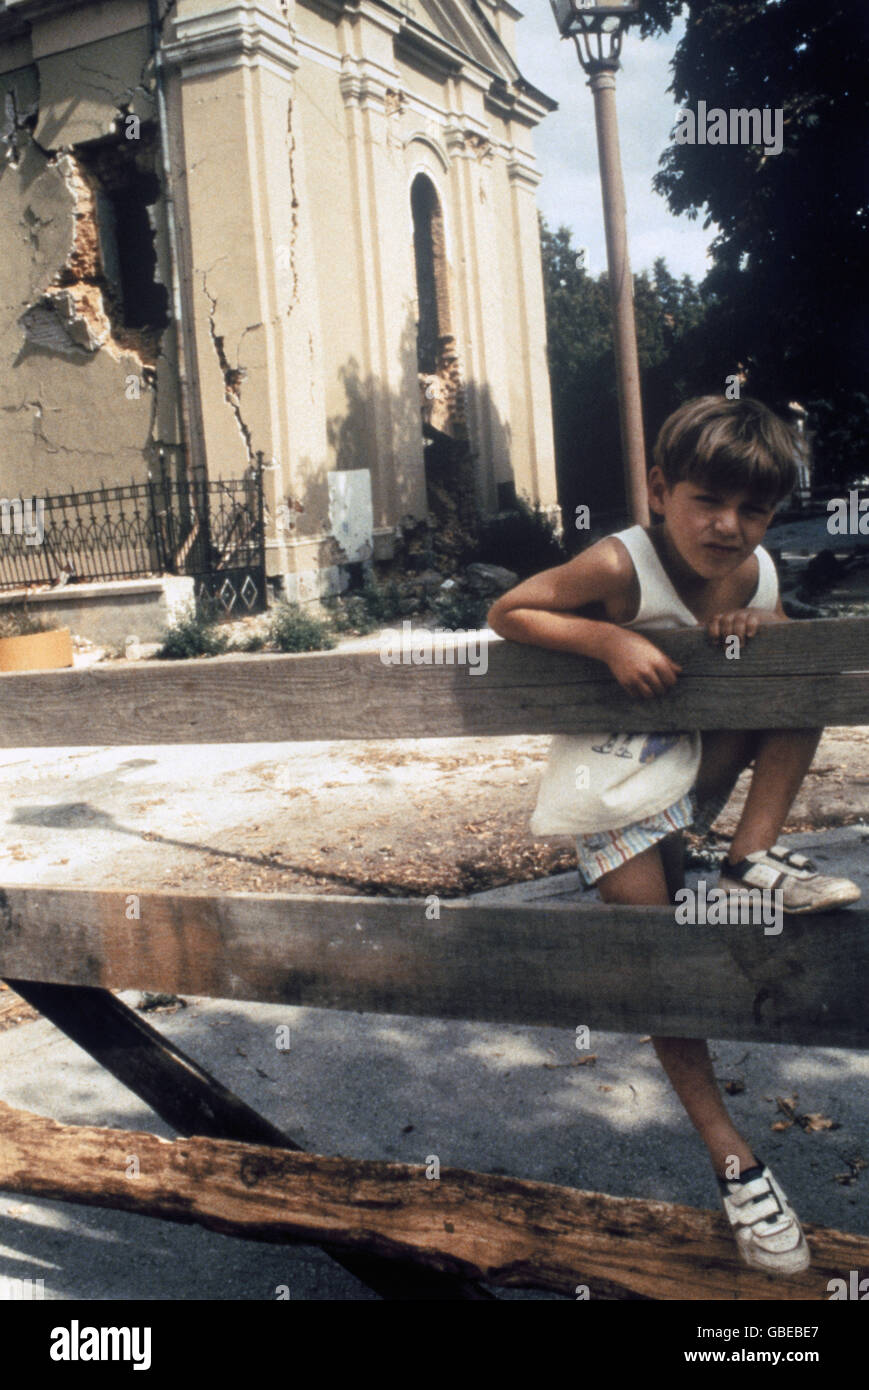 events, Croatian War of Independence 1991 - 1995, destroyed church in Karlovac, Croatia, August 1992, Yugoslavia, Yugoslav Wars, Balkans, conflict, destruction, 1990s, 90s, 20th century, historic, historical, people, child,_NOT, Additional-Rights-Clearences-Not Available Stock Photo